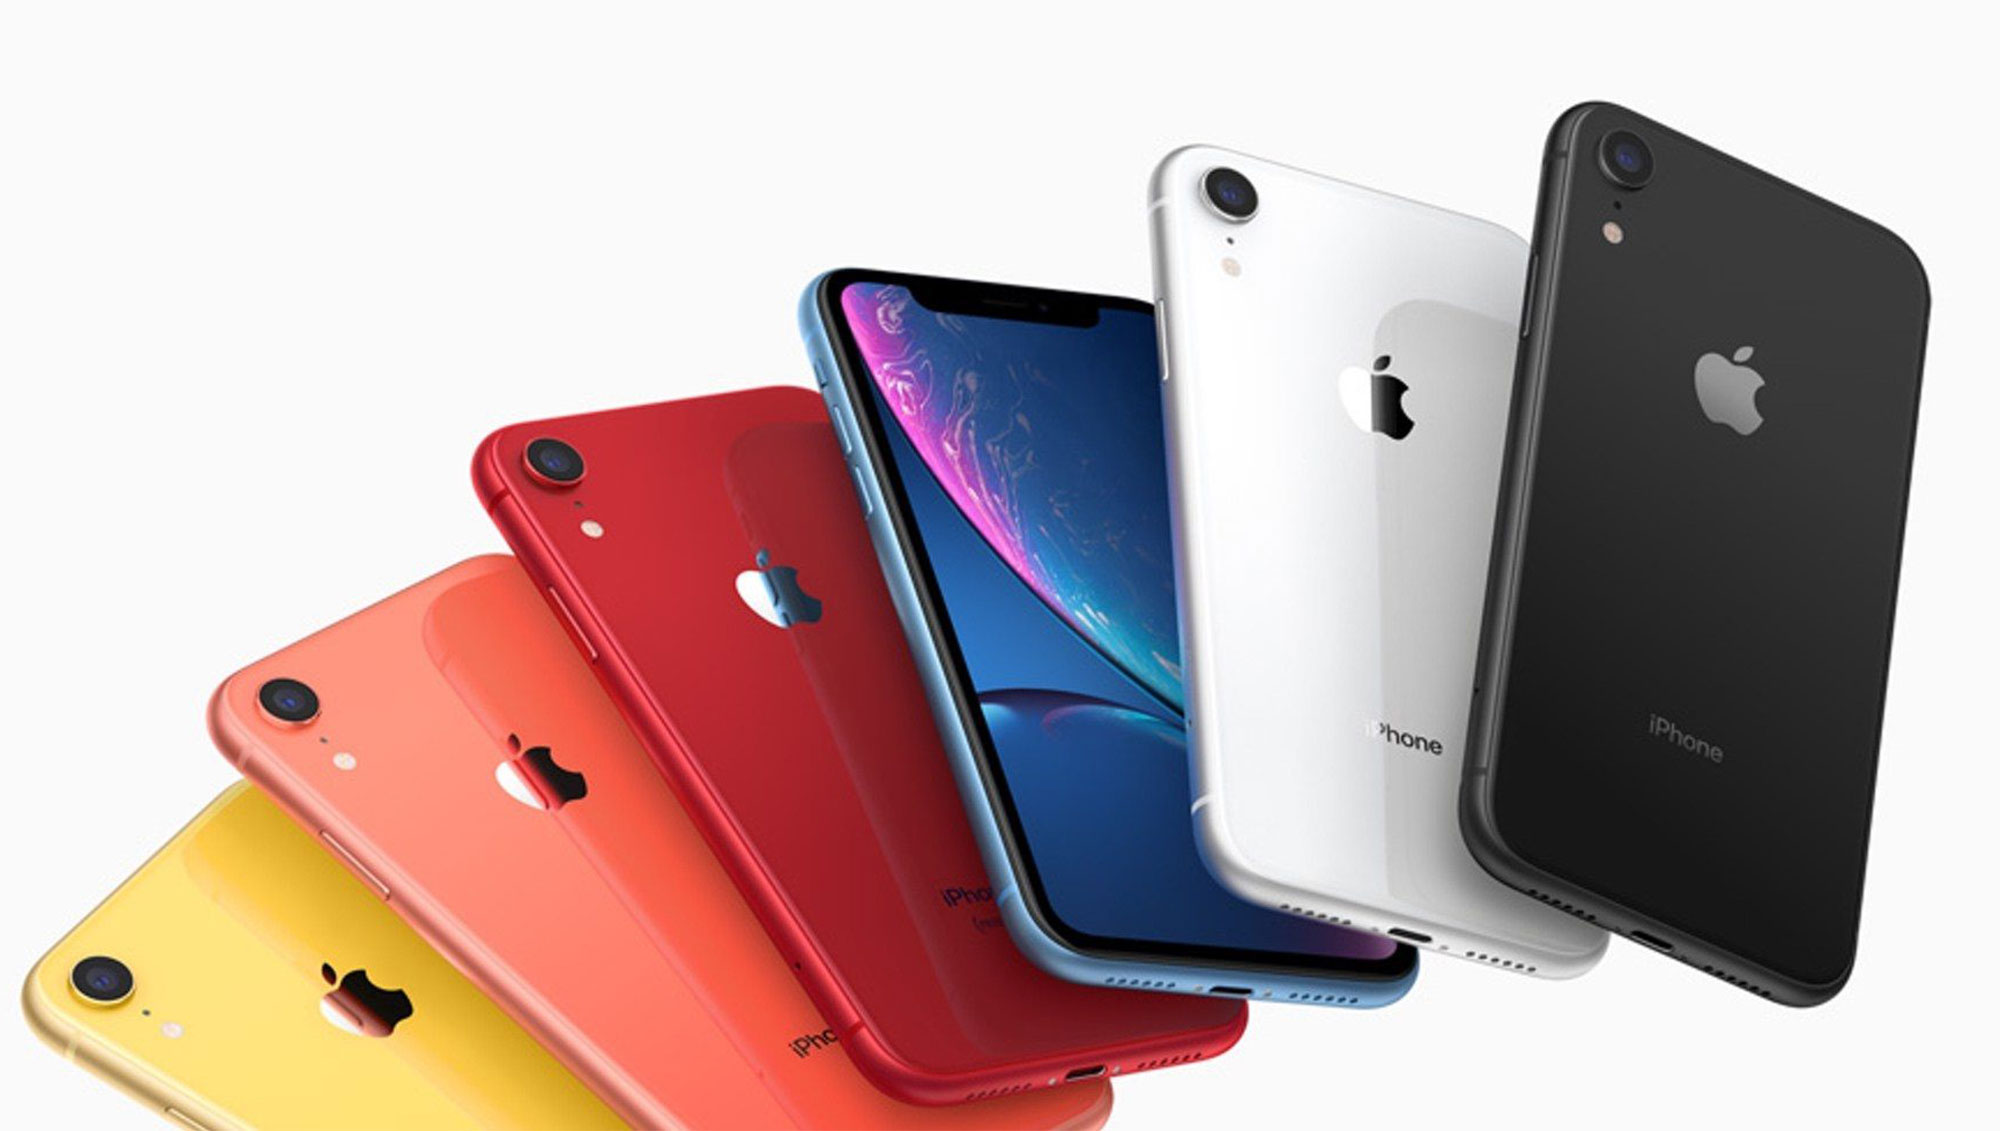 2019 iPhone XR to be Available in two New Colors, Replacing Coral and Blue